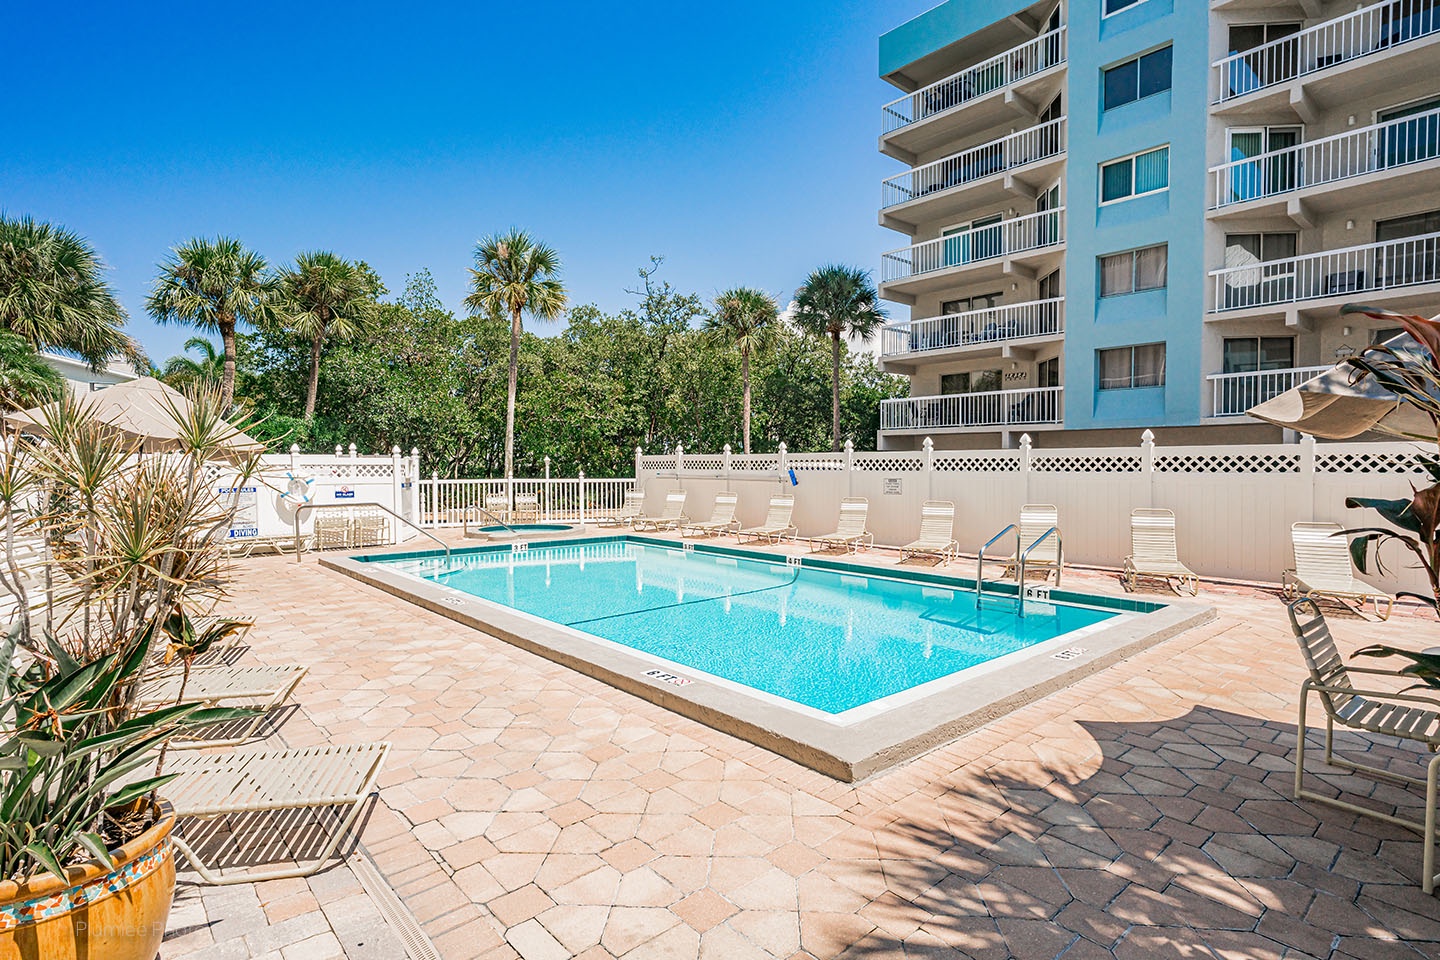 The community pool and lush, tropical landscaping.